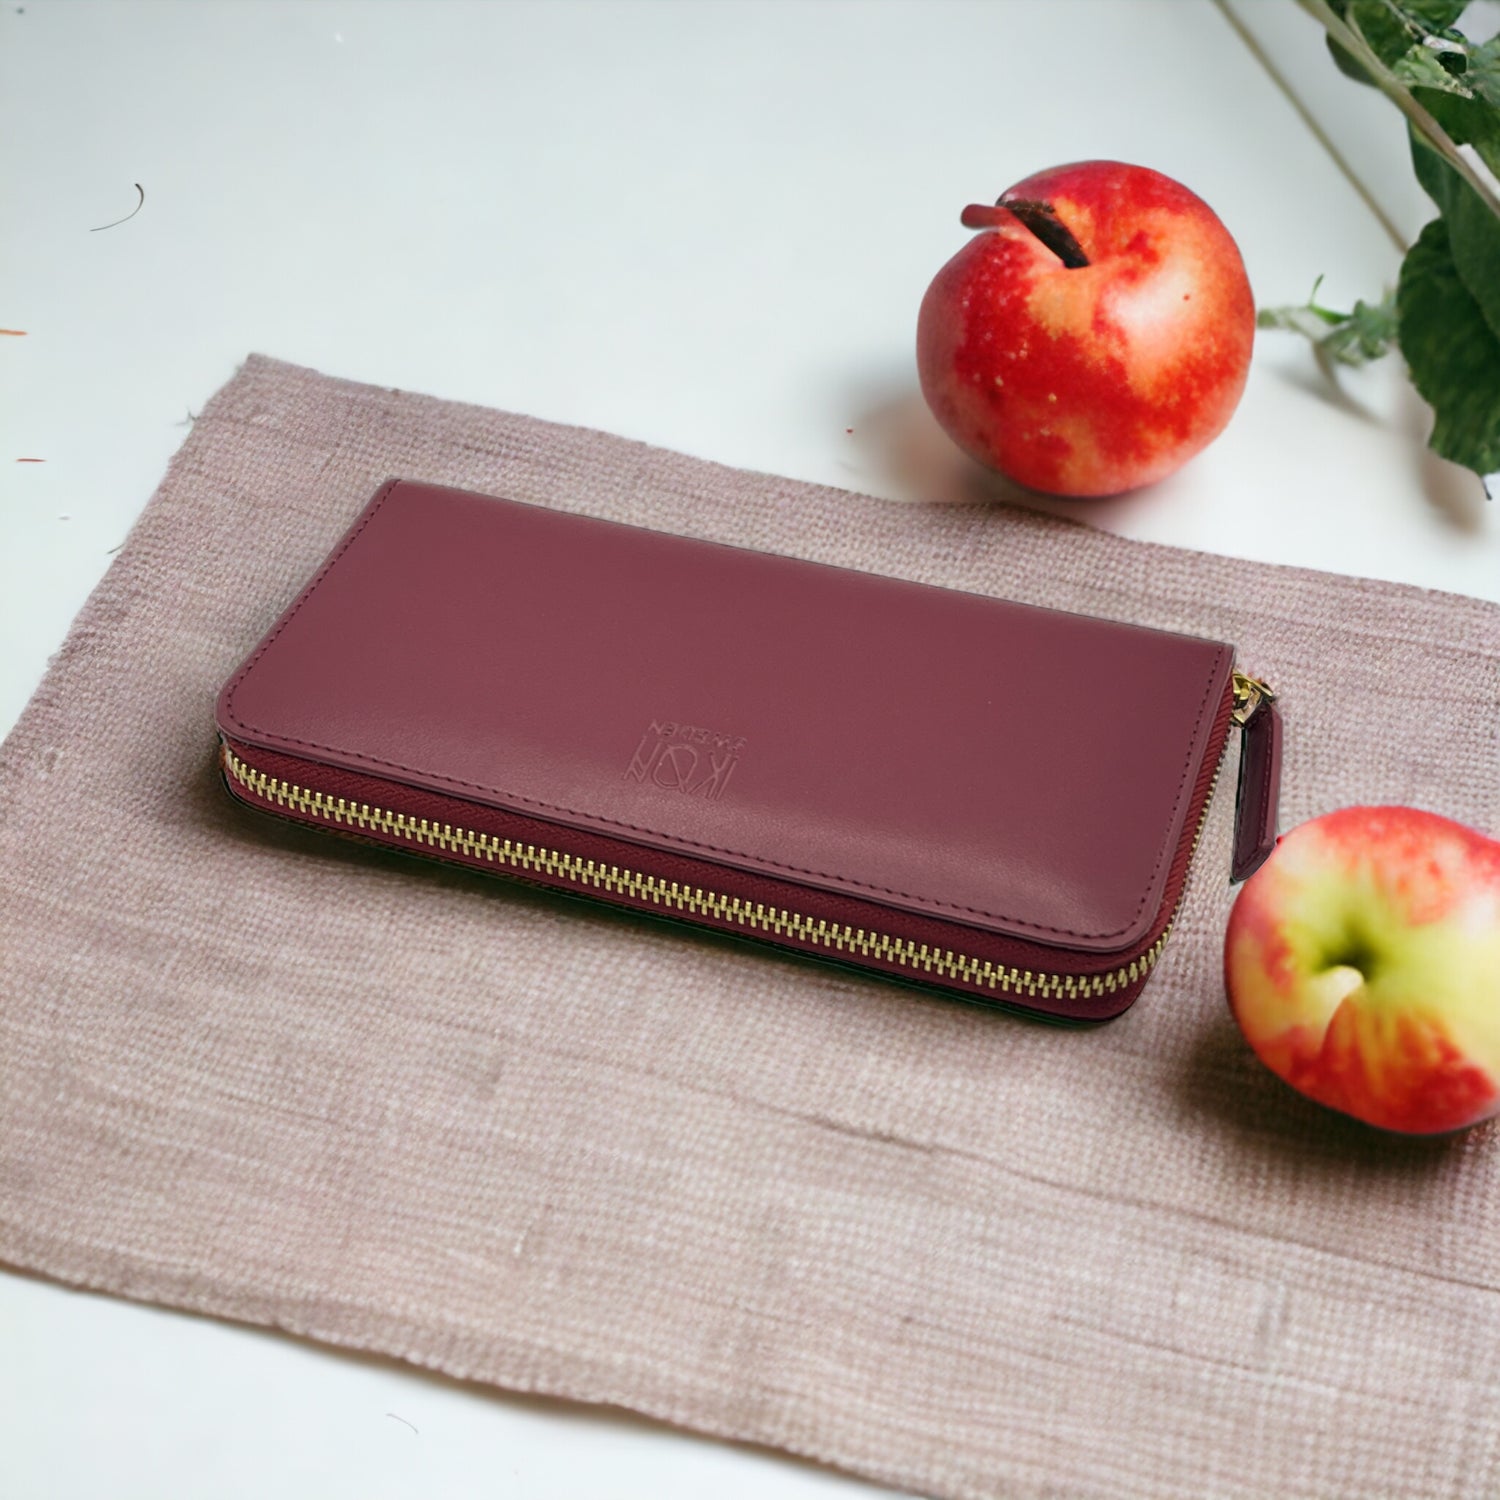 Apple Leather Created from Apple Waste